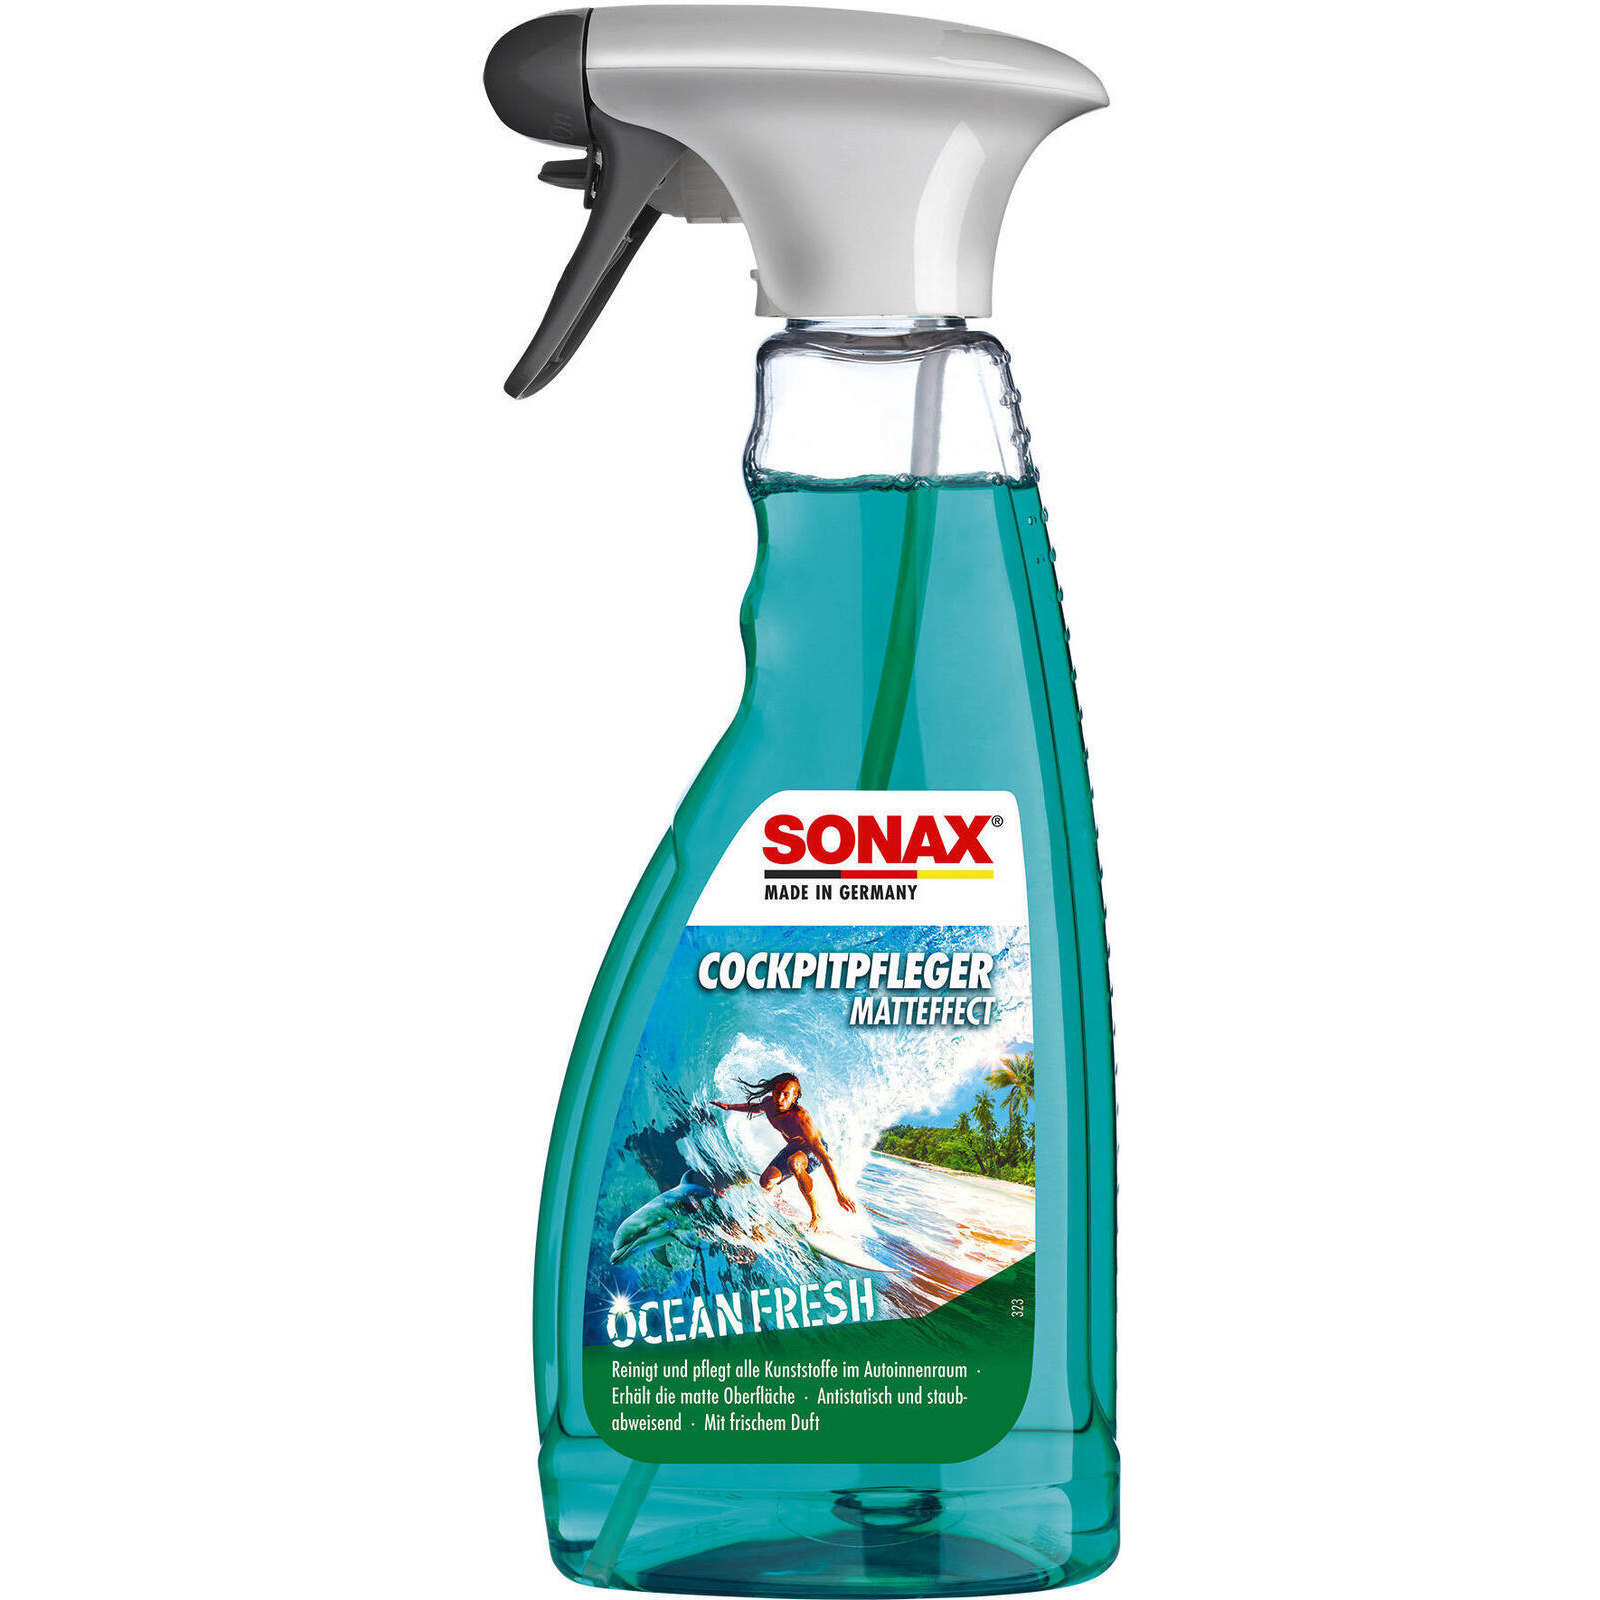 SONAX Synthetic Material Care Products Cockpit Spray Matt Effect Ocean-fresh